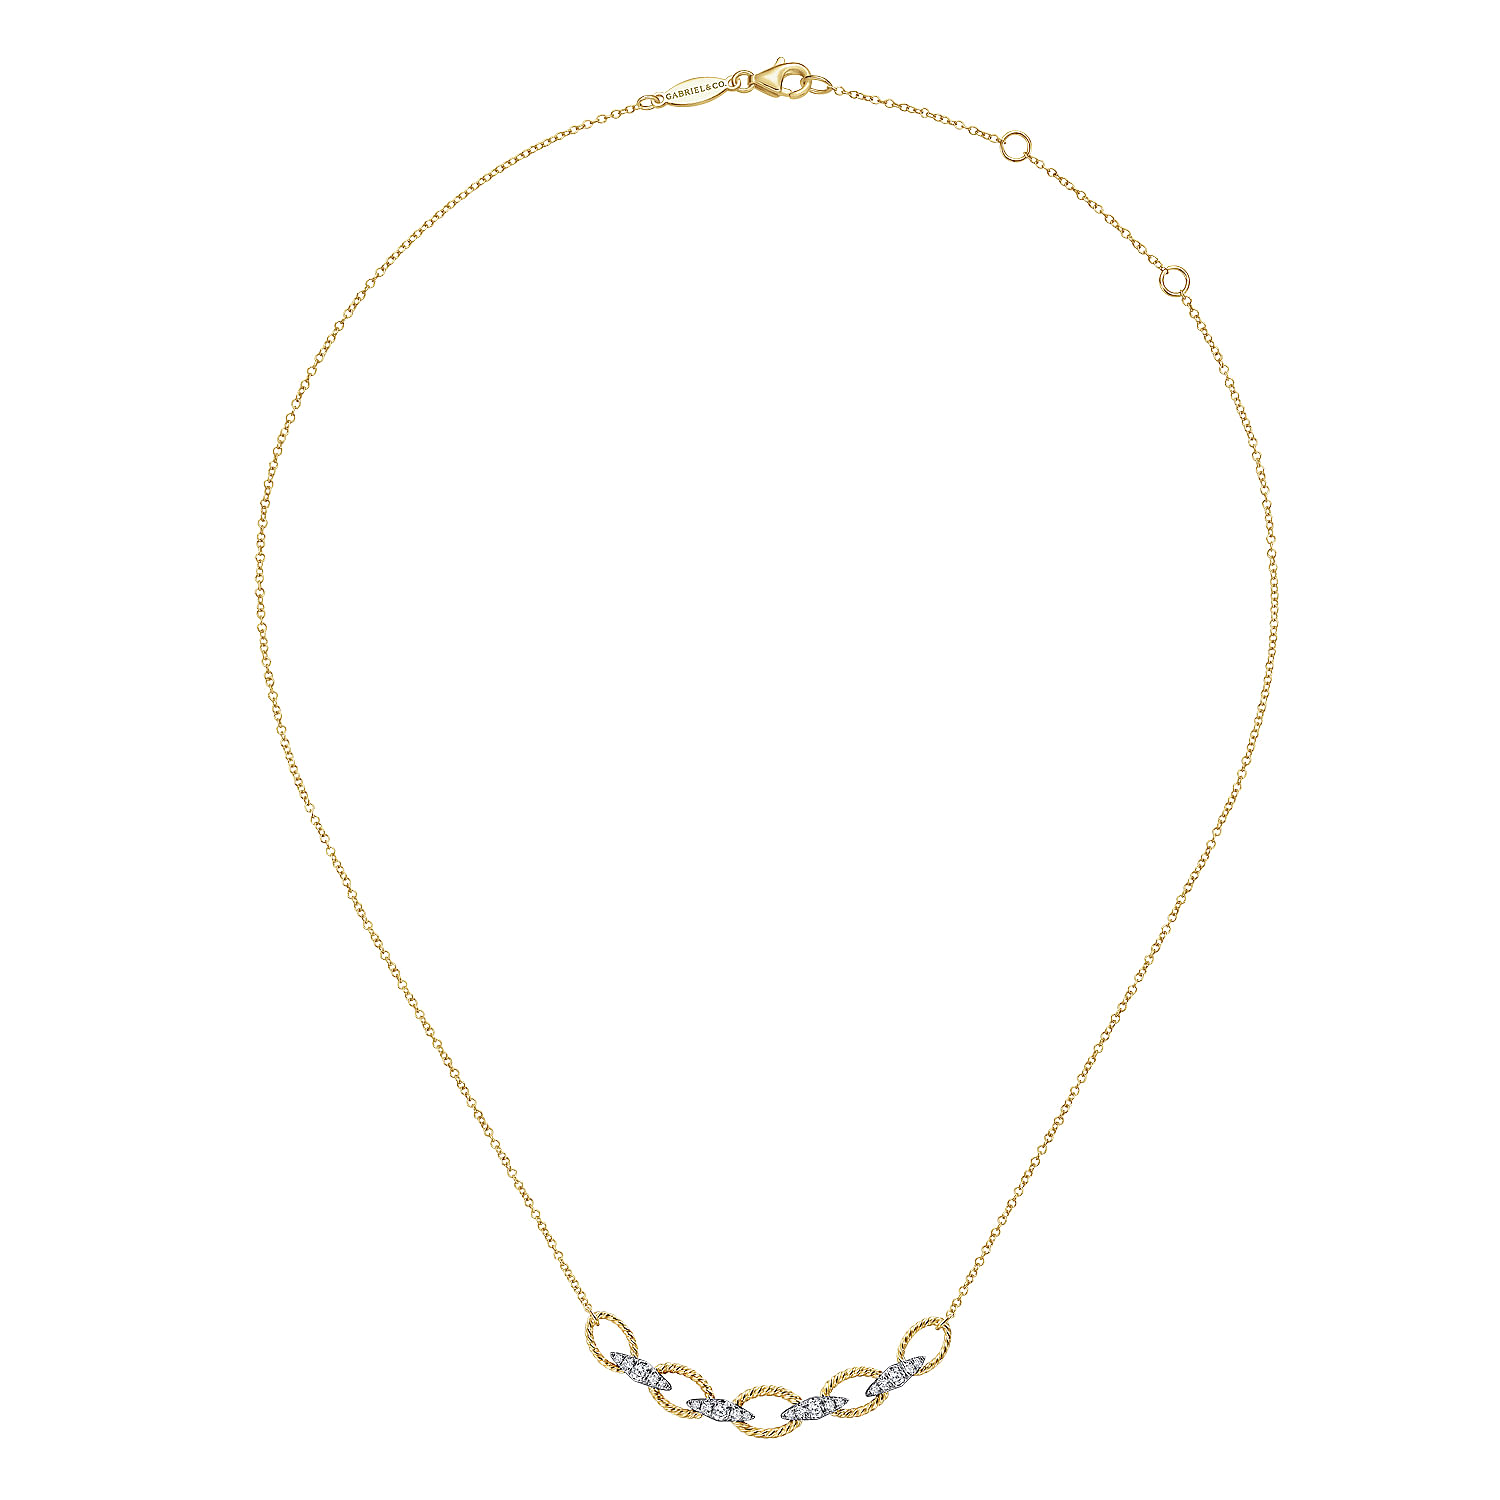 14K Yellow-White Gold Twisted Rope Oval Link Necklace with Diamond Connectors